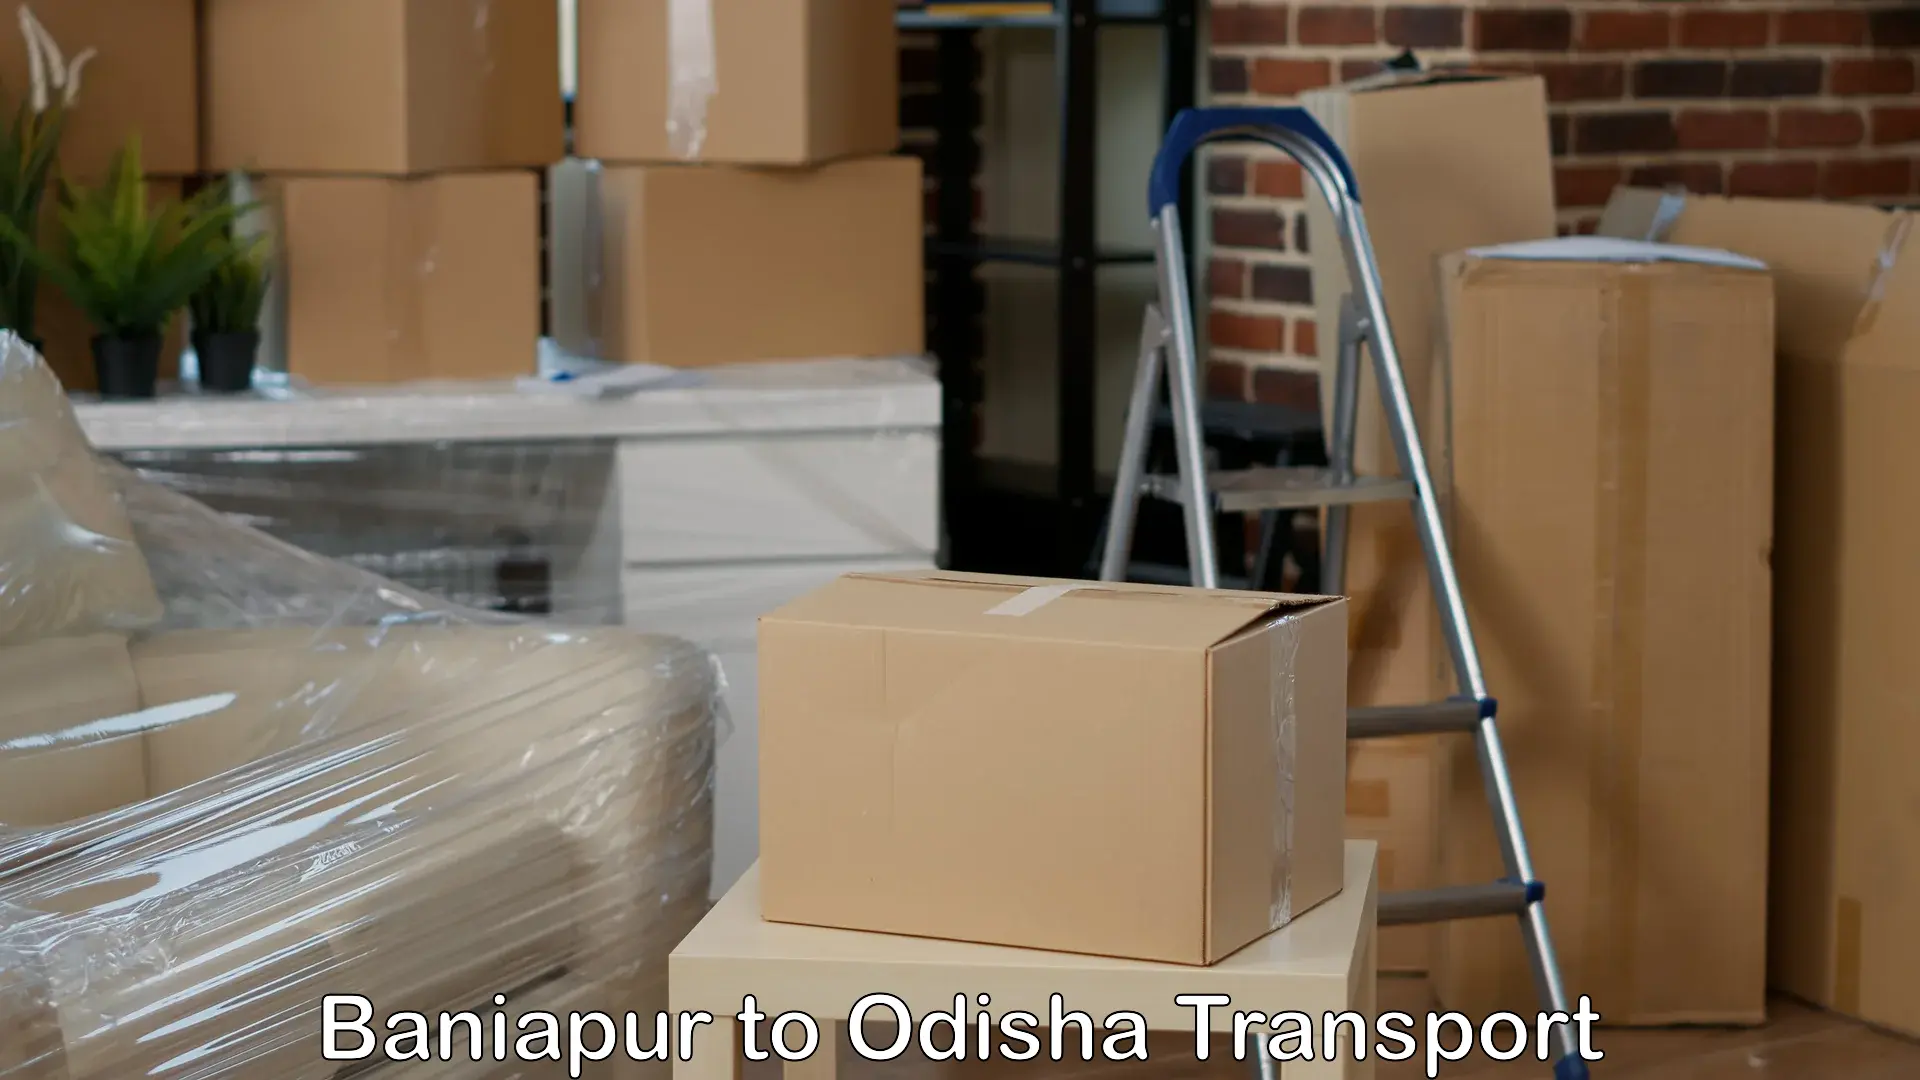 Truck transport companies in India in Baniapur to Udala